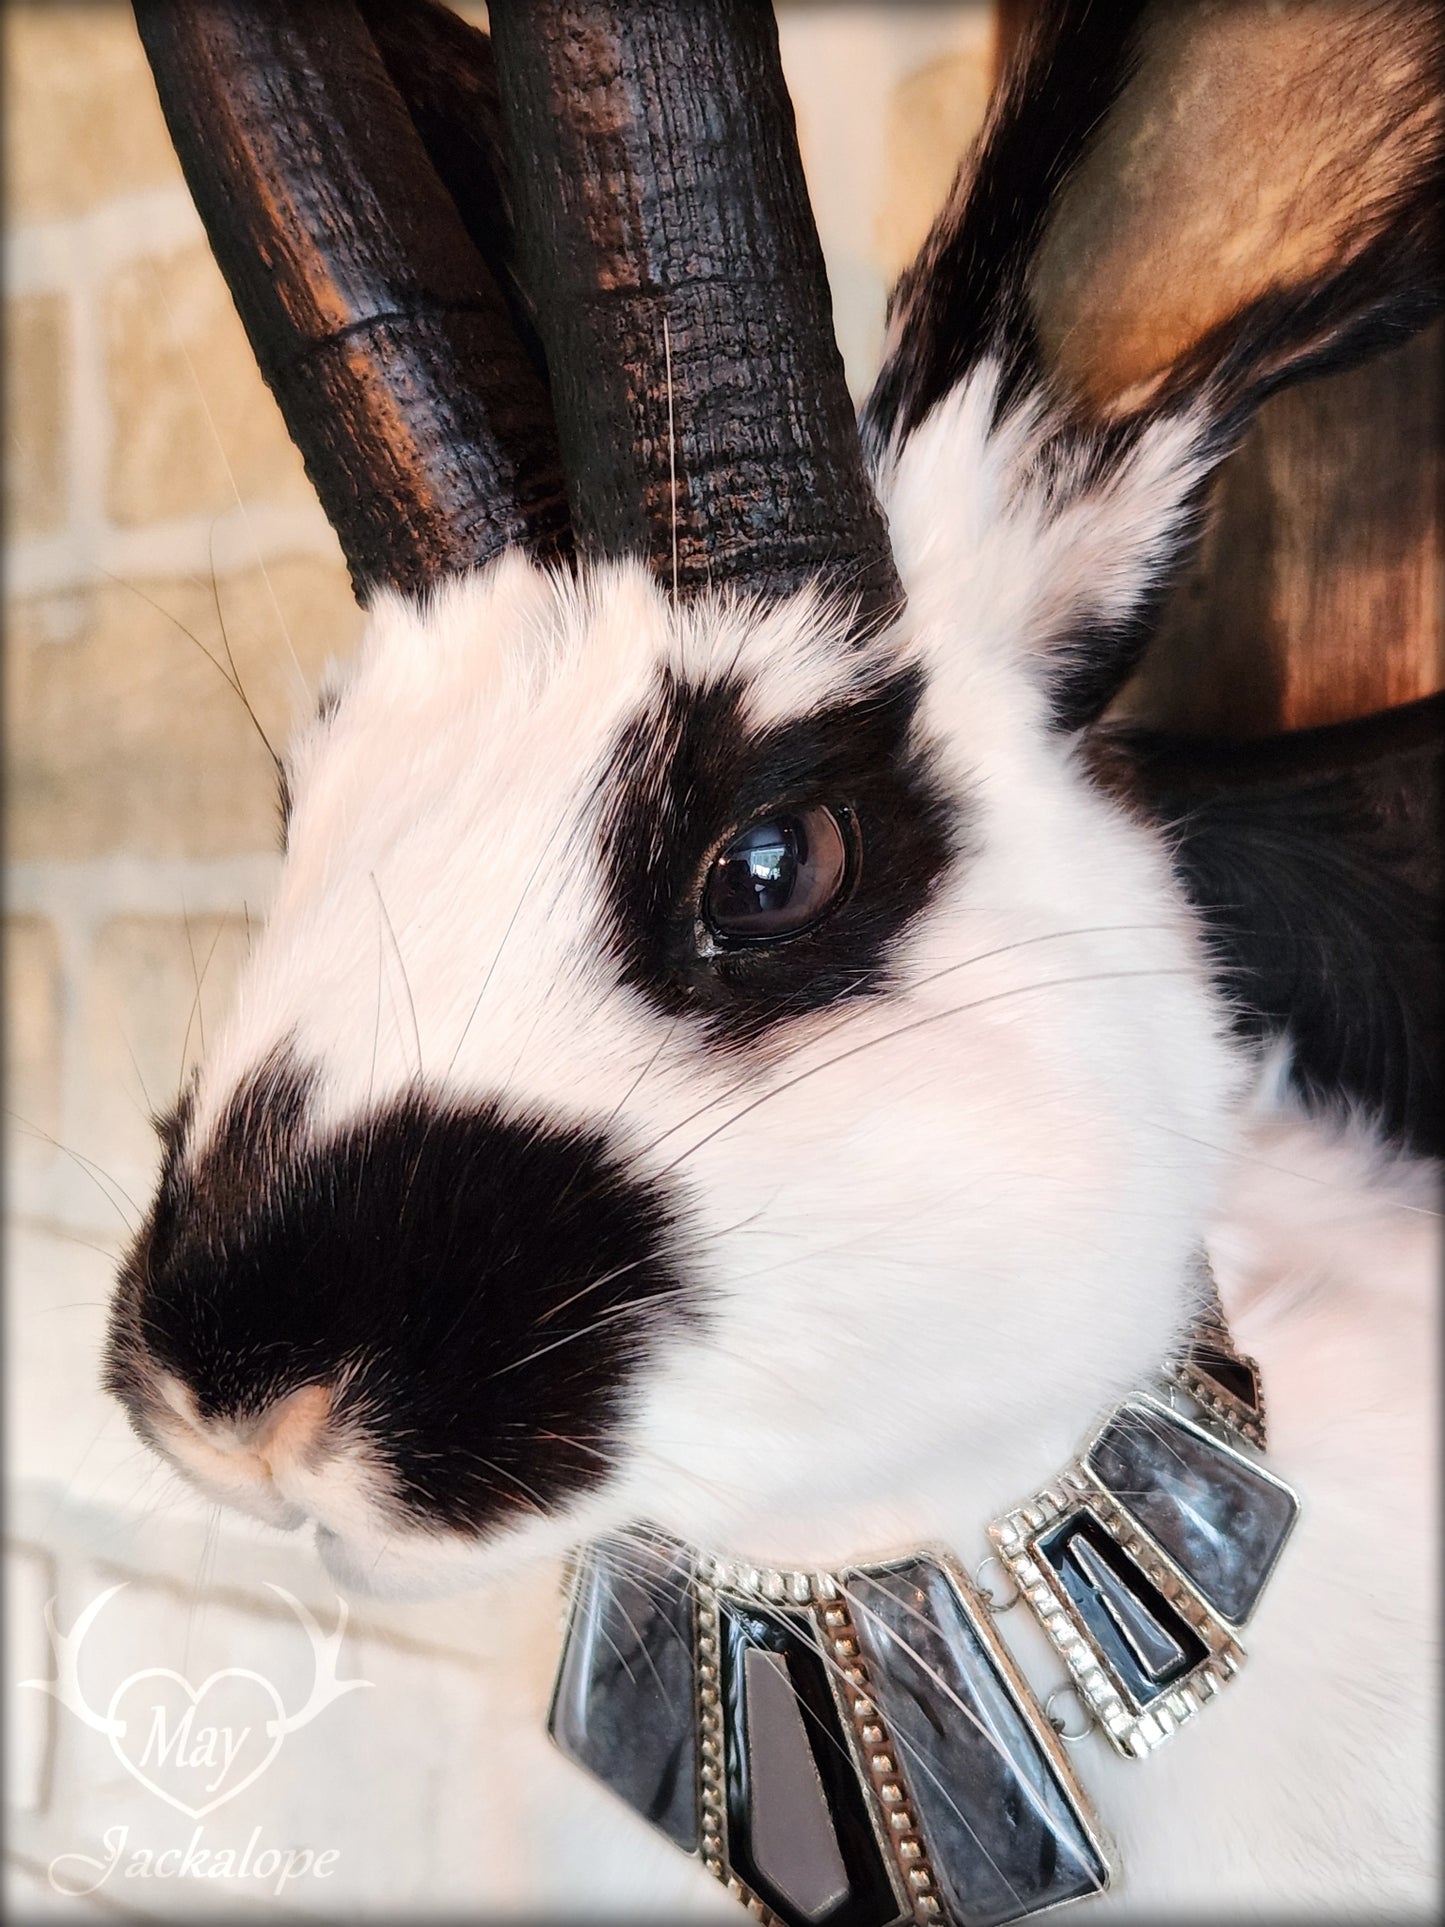 Black & white Jackalope taxidermy with black horns replica, dark eyes & with a necklace.